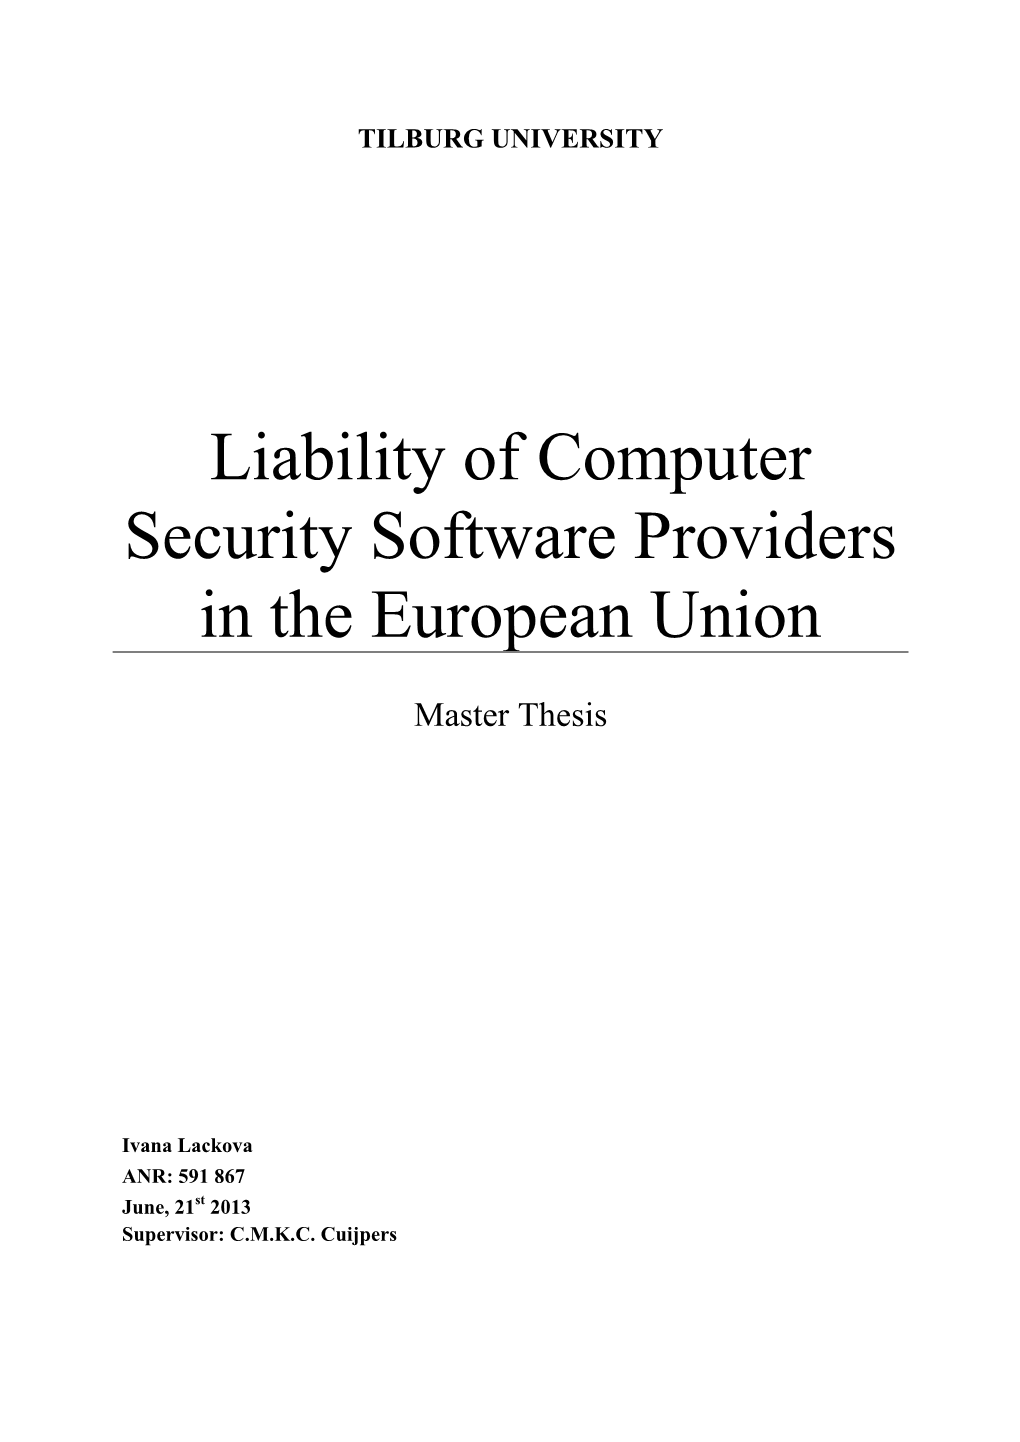 Liability of Computer Security Software Providers in the European Union